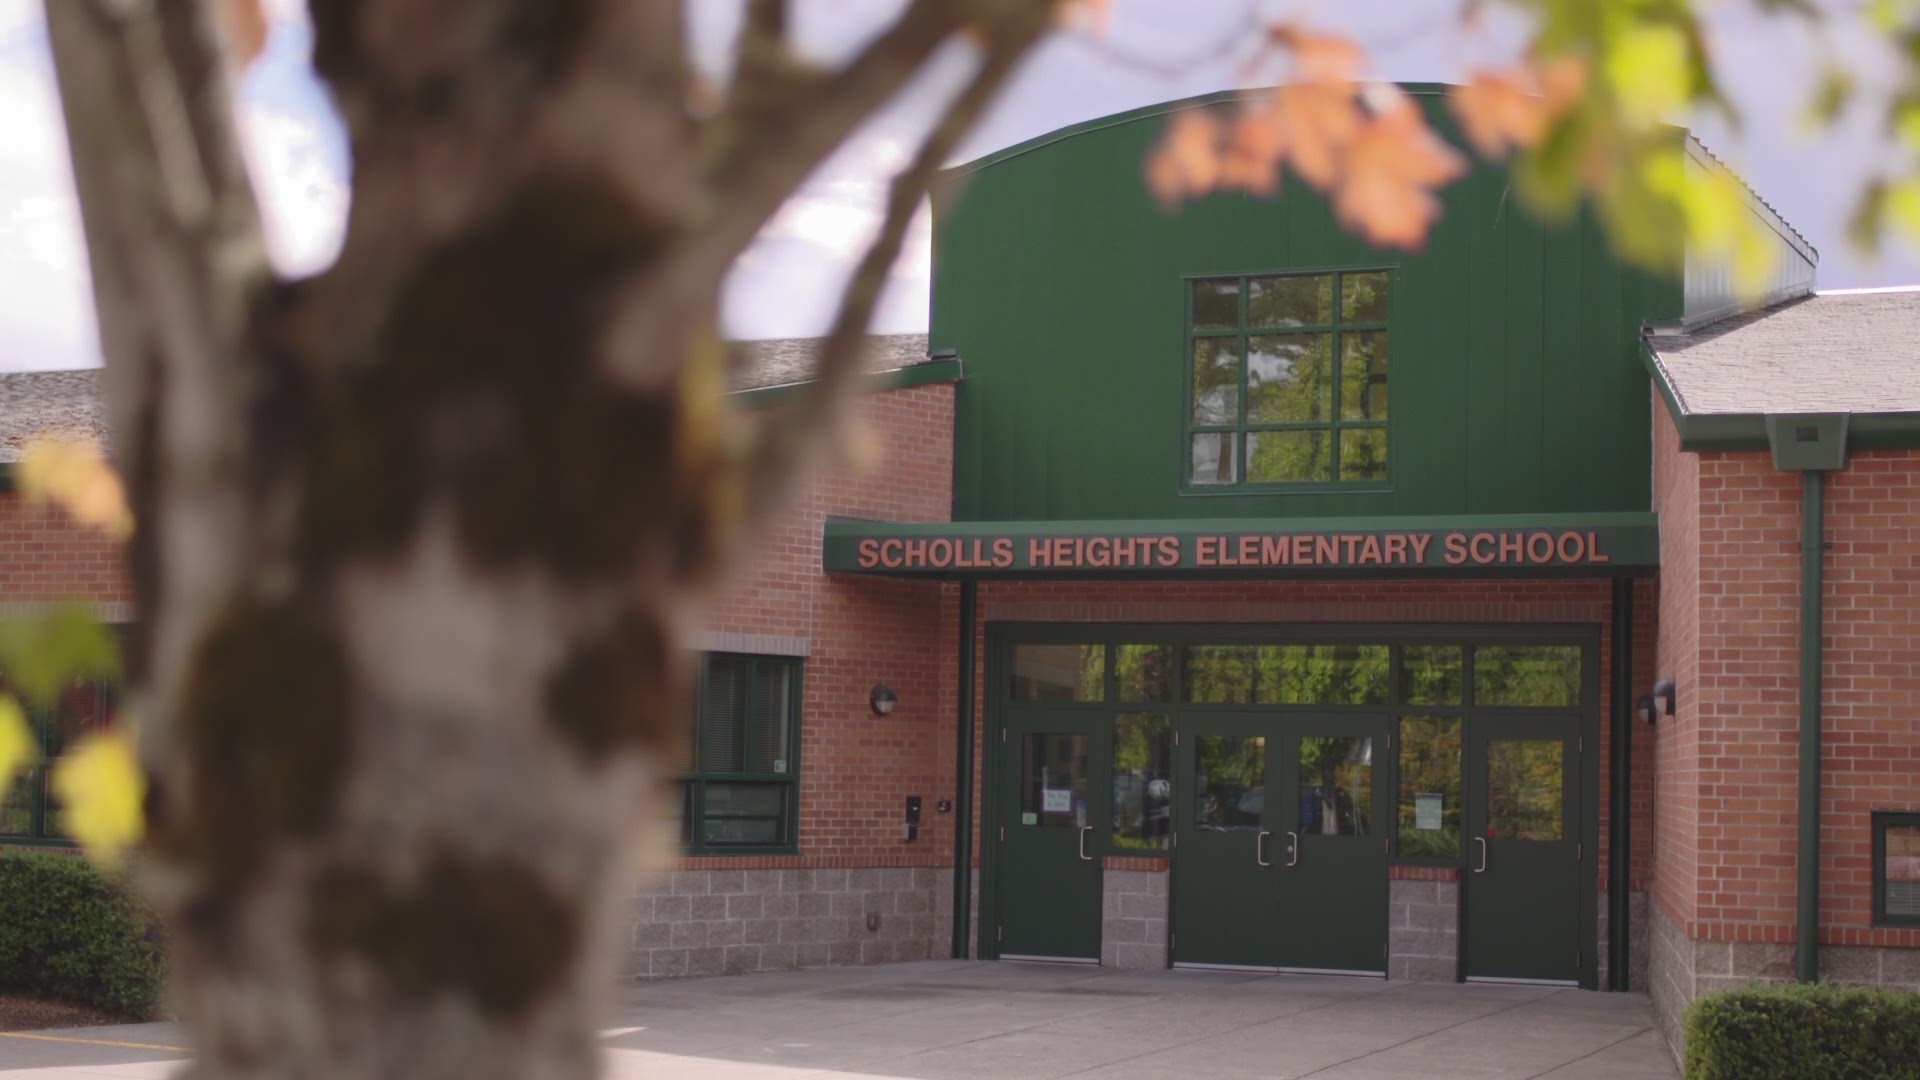 KGW invited Kate Brown to Scholls Heights Elementary in Beaverton for a conversation with teachers.